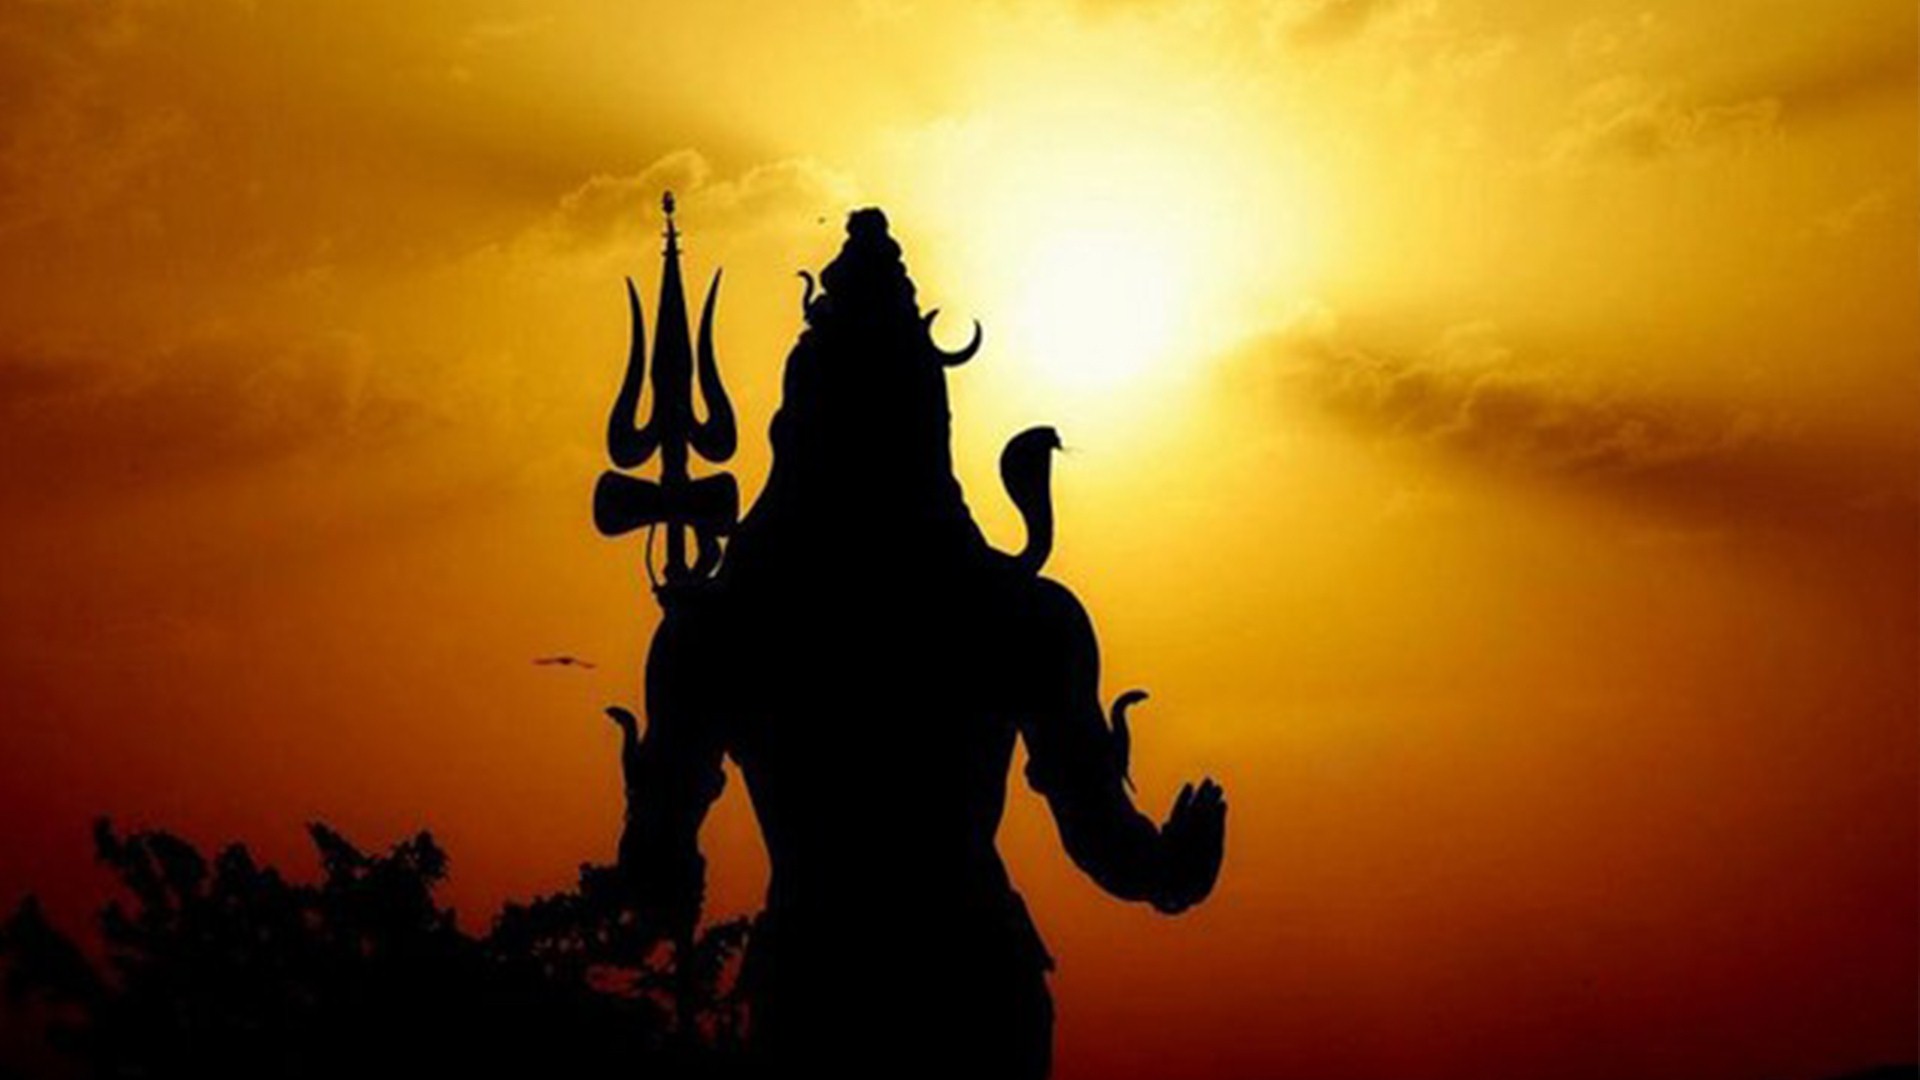 Lord Shiva Images In Hd | Hindu Gods and Goddesses